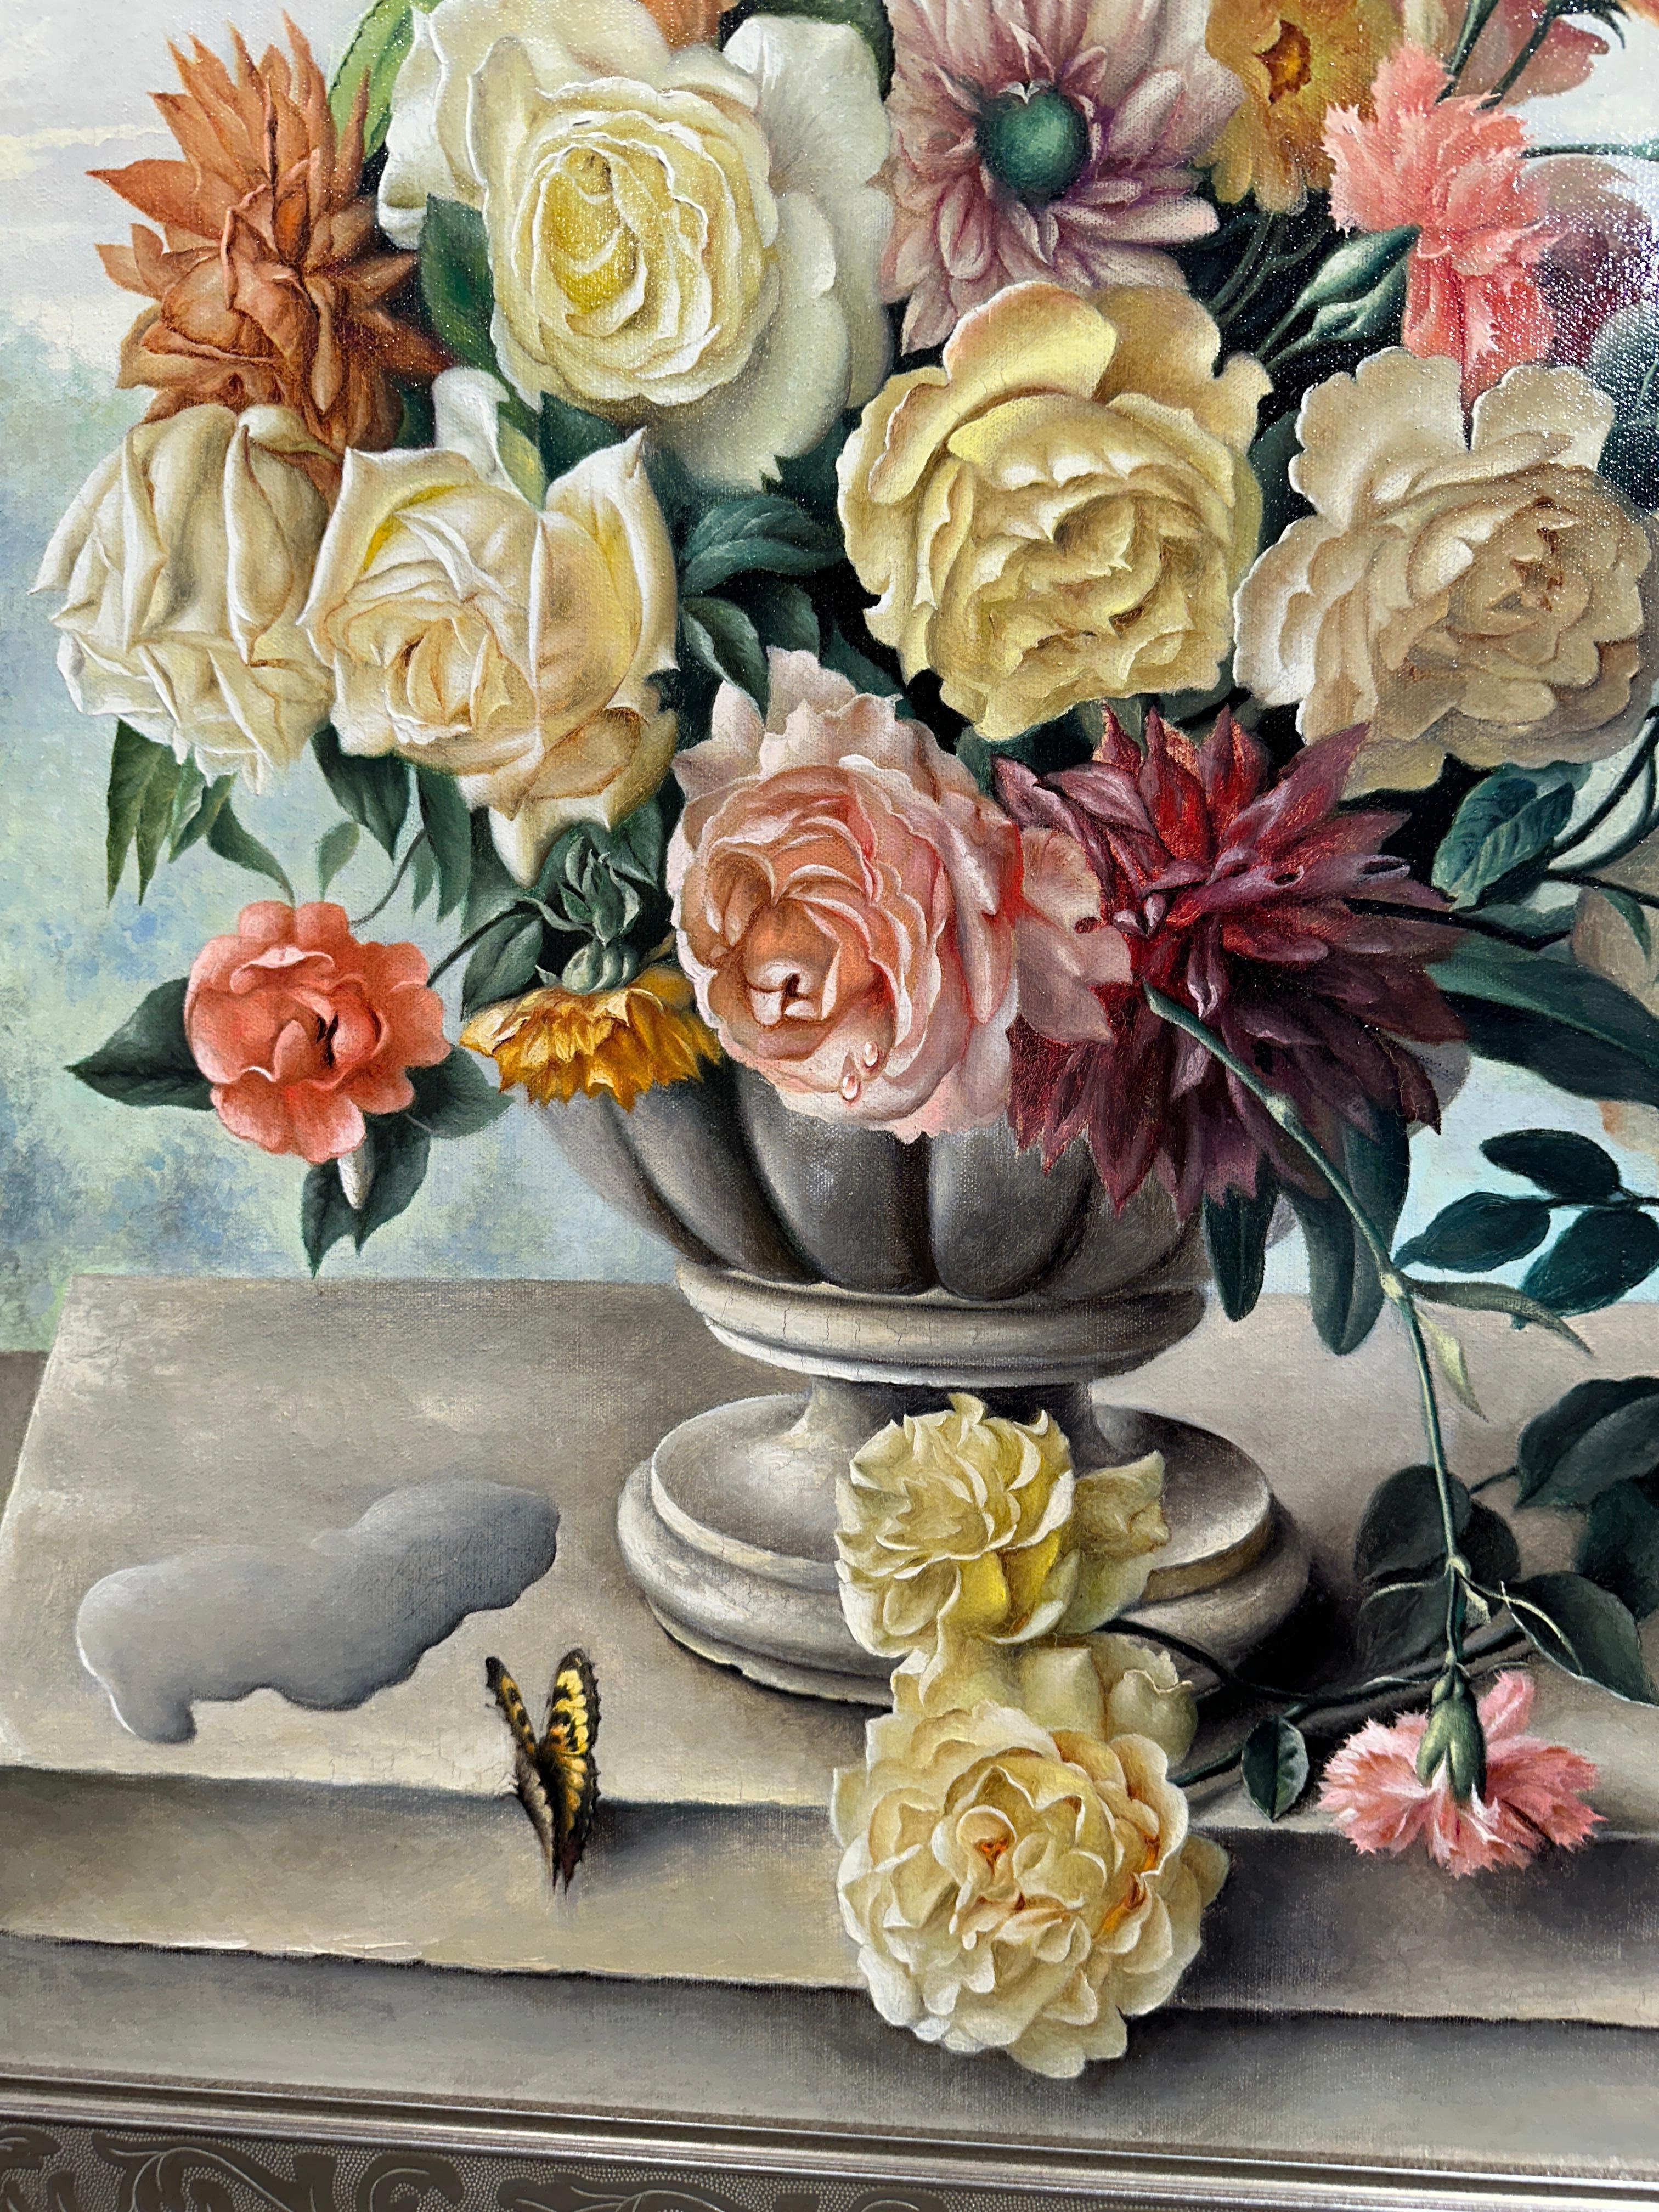 Floral Still Life in Fluted Bowl
Franz Leitgeb (Austrian, 1911-1997)
Signed Lower Right
33 x 27 inches
38.5 x 32 inches
